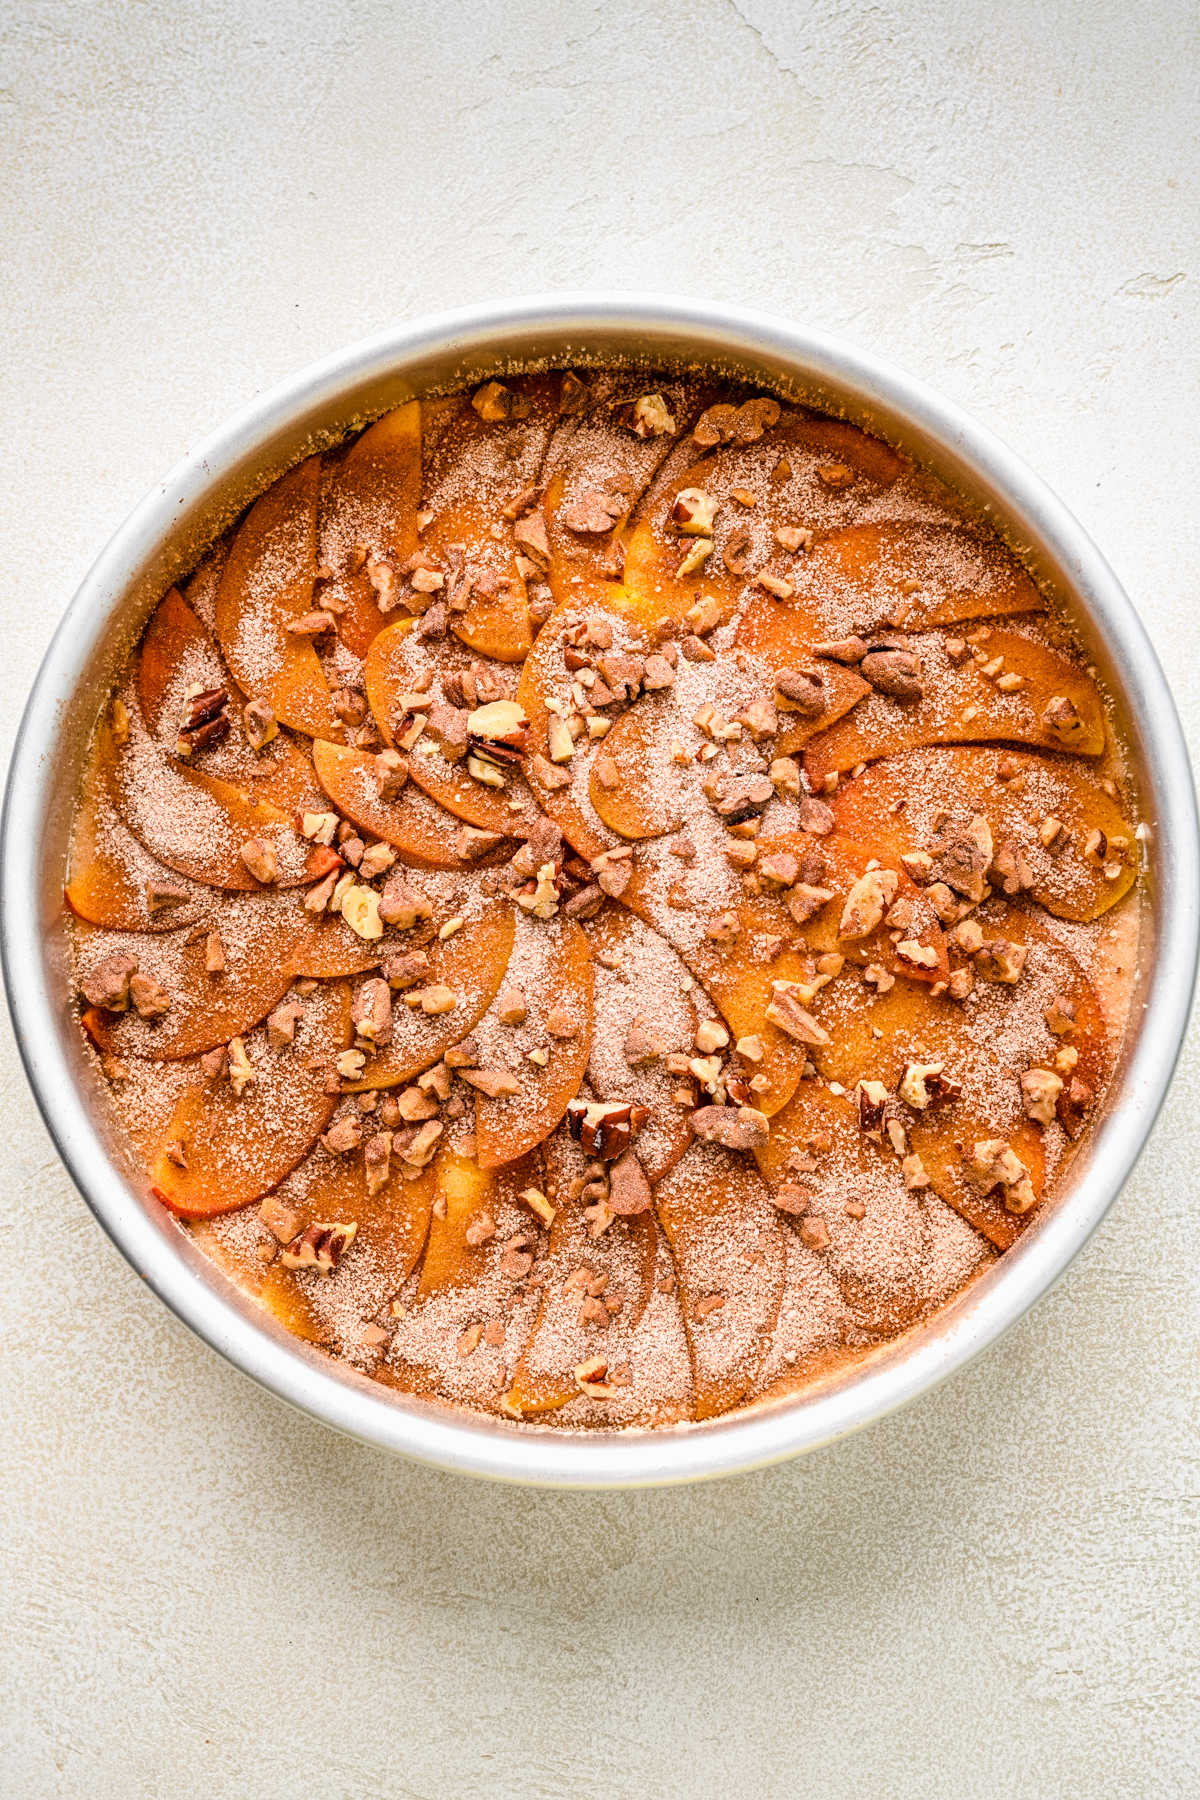 Cinnamon sugar and pecans over peach slices in a cake pan.